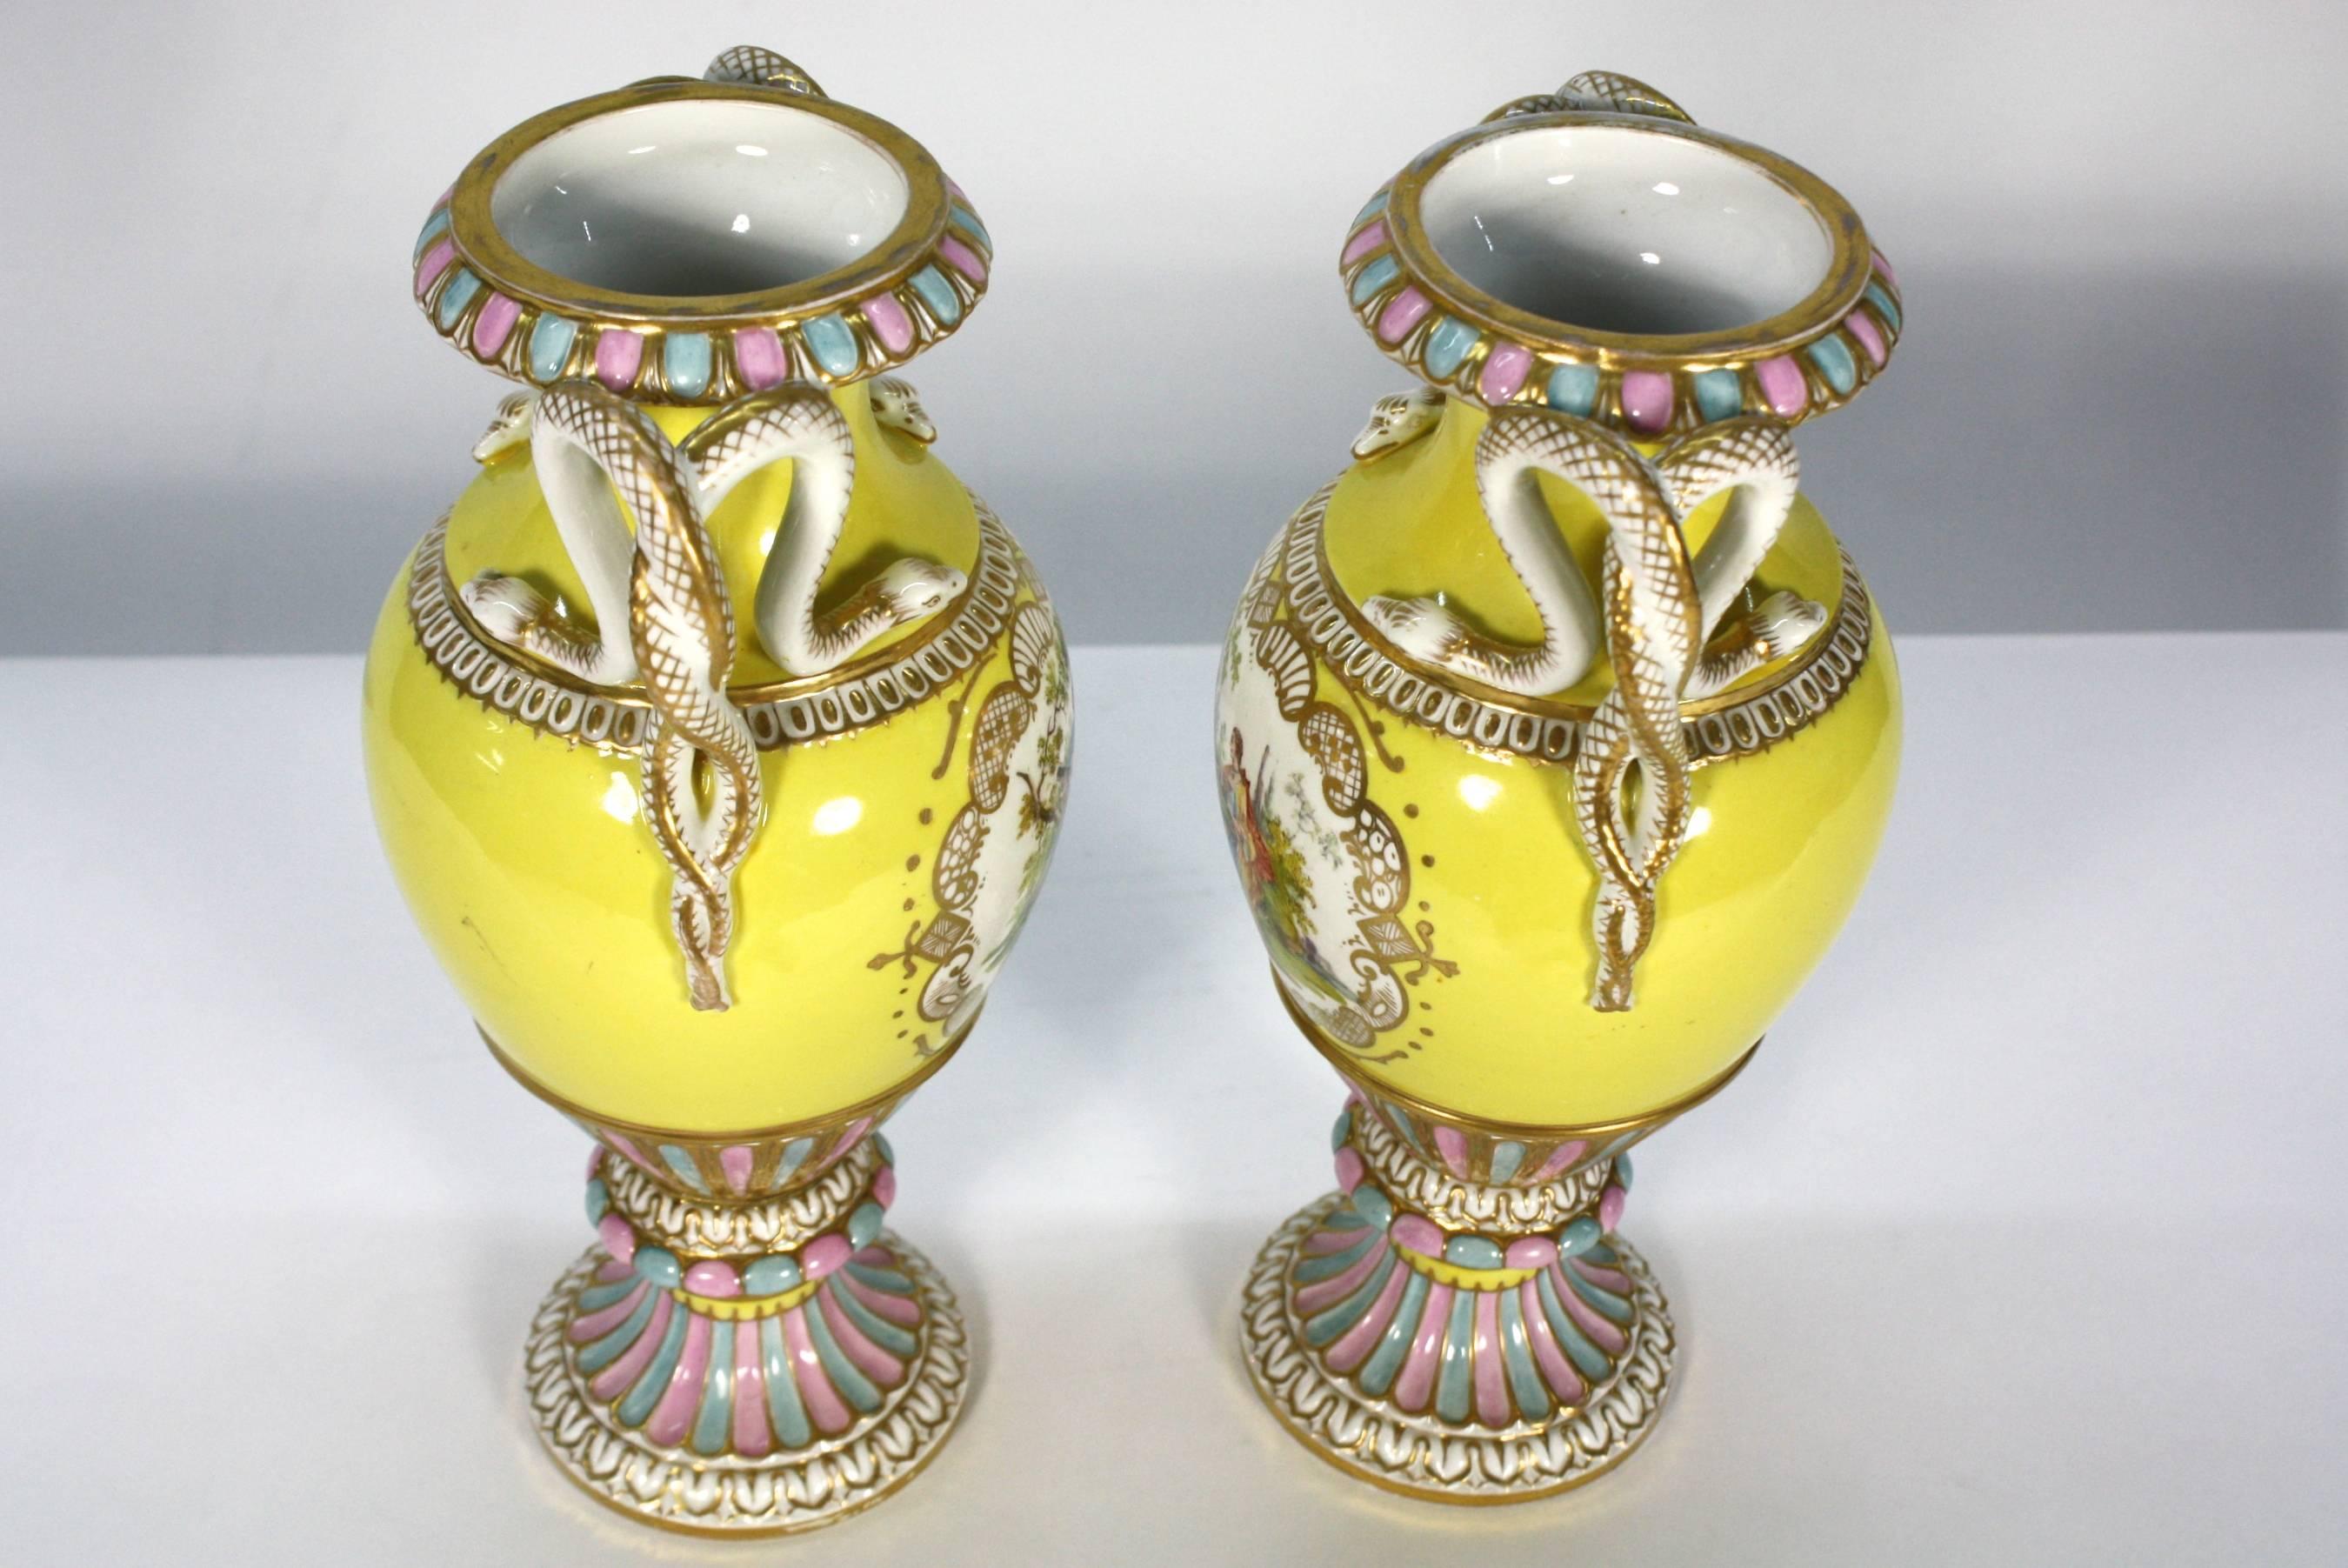 vases with handles